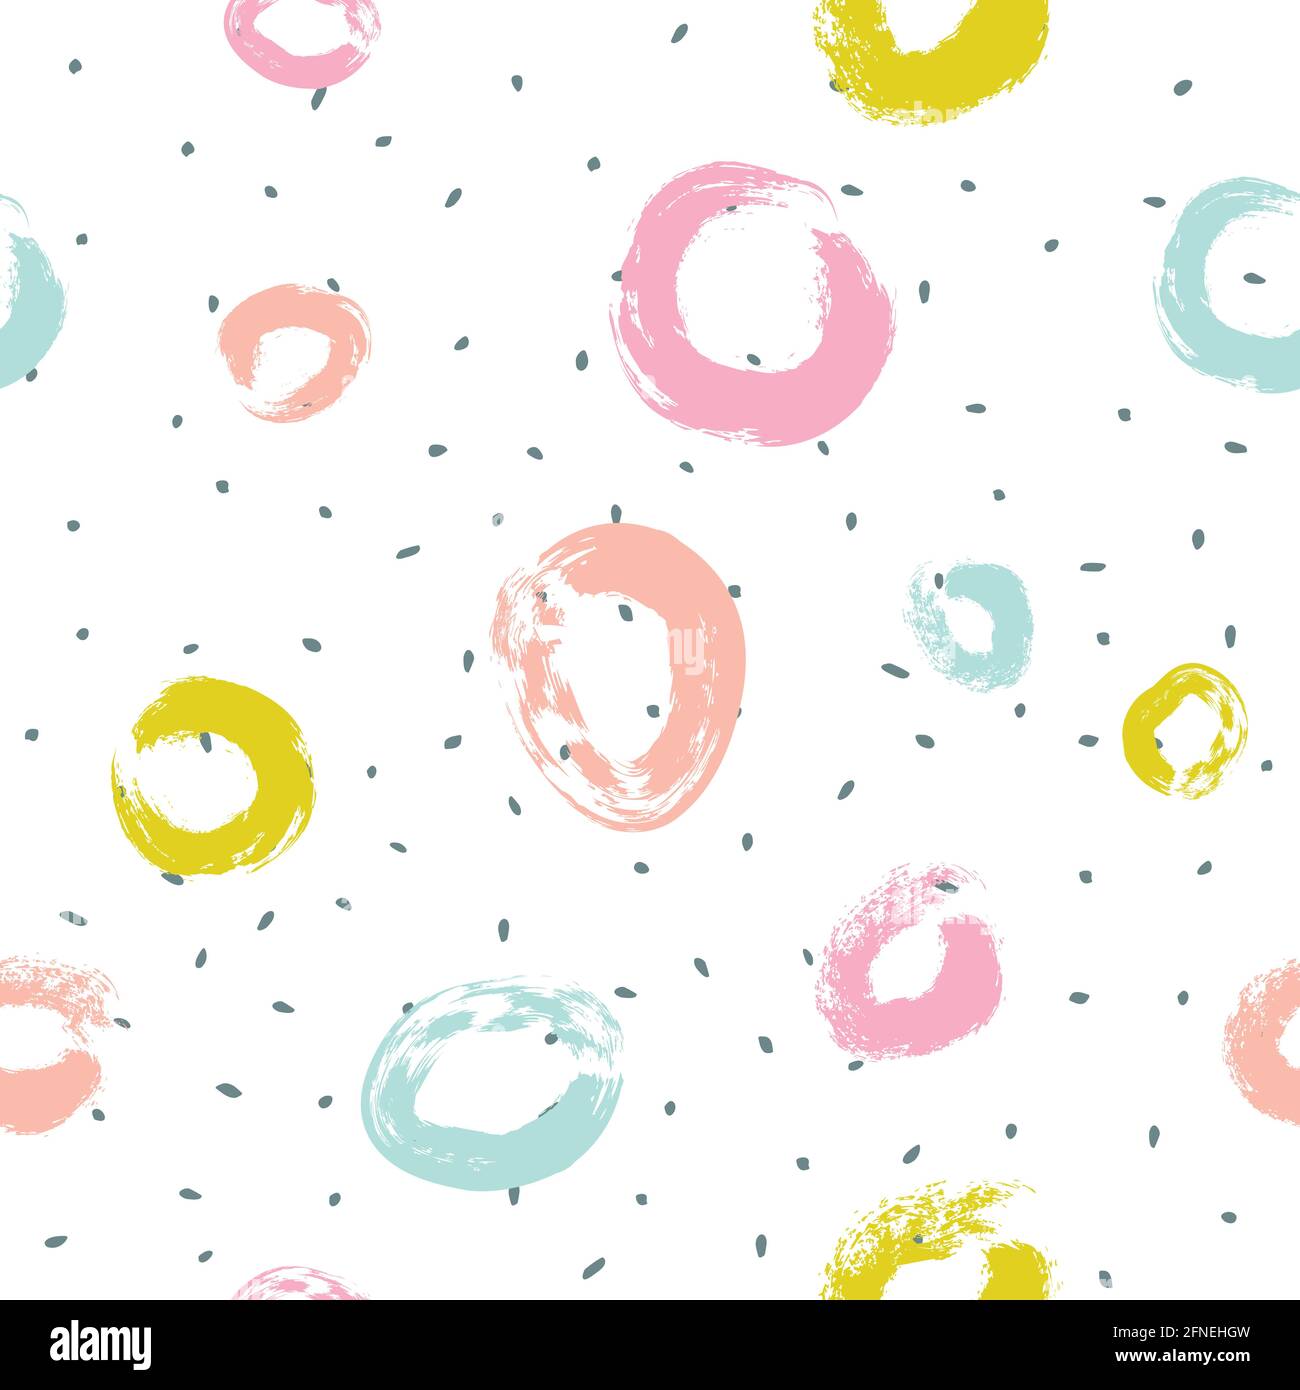 Circle seamless pattern. Creative texture for fabric, textile Stock Vector